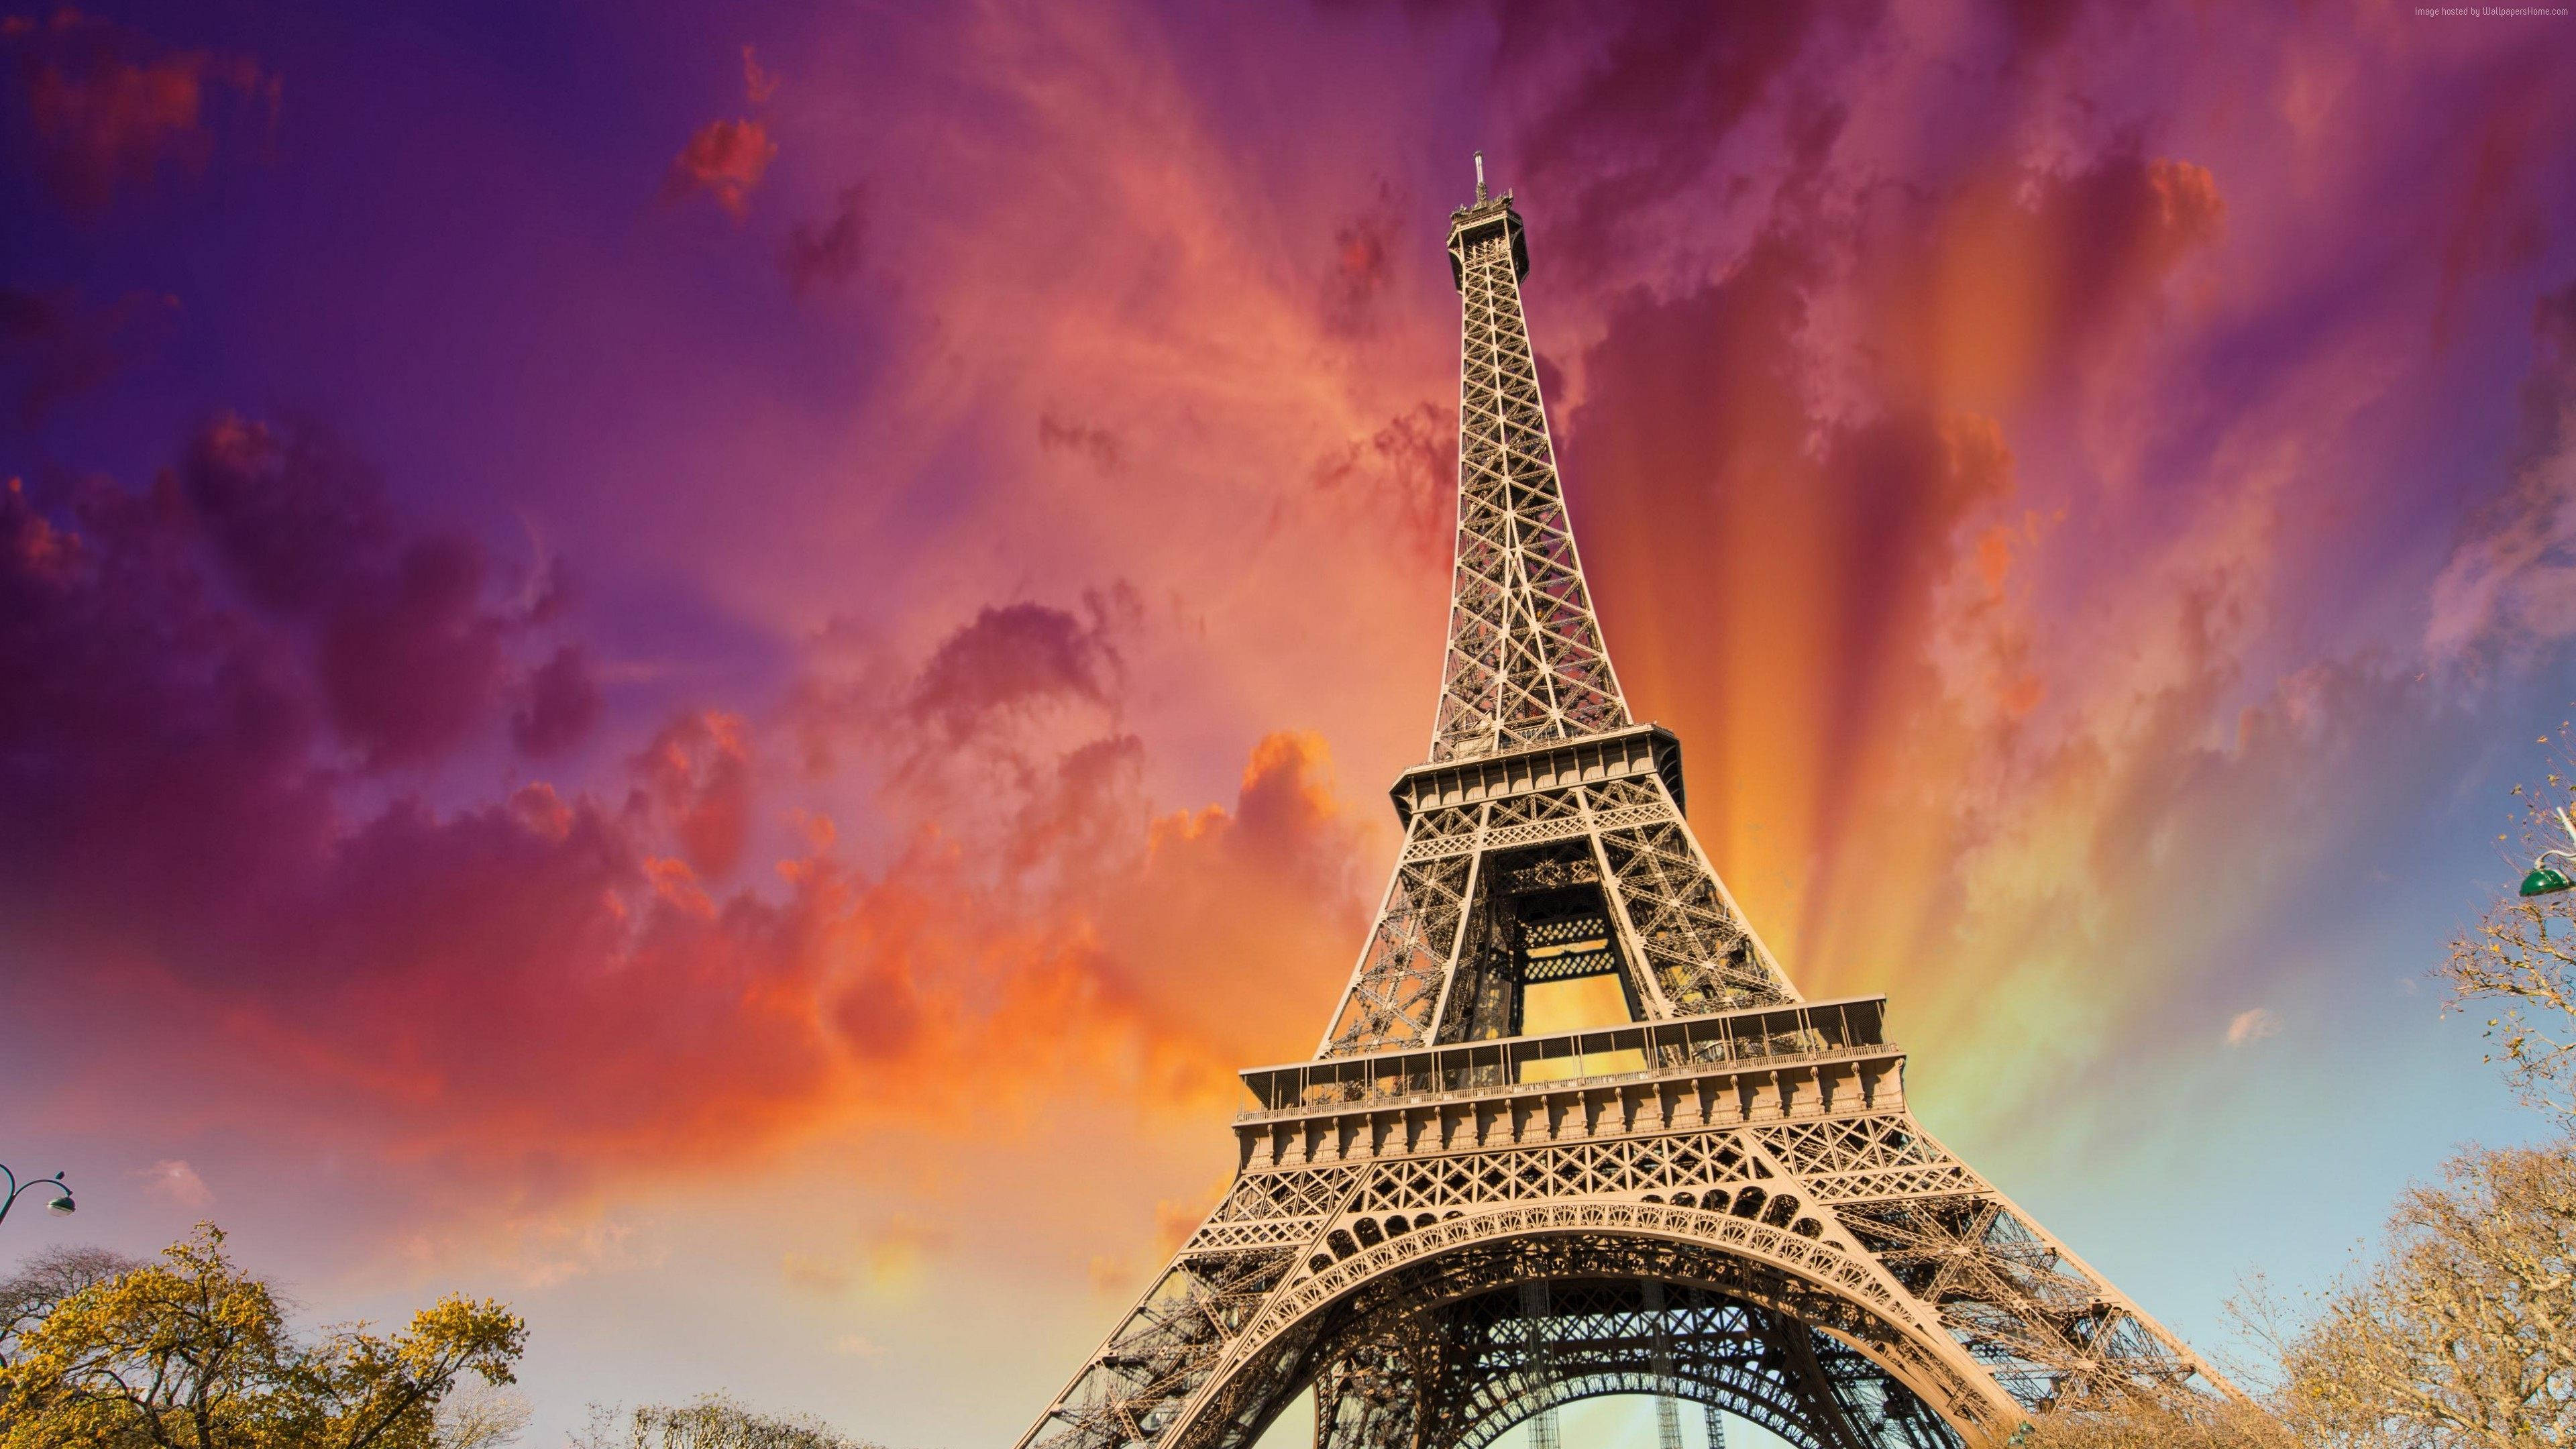 Download Eiffel Tower With Aesthetic Sun Rays Wallpaper